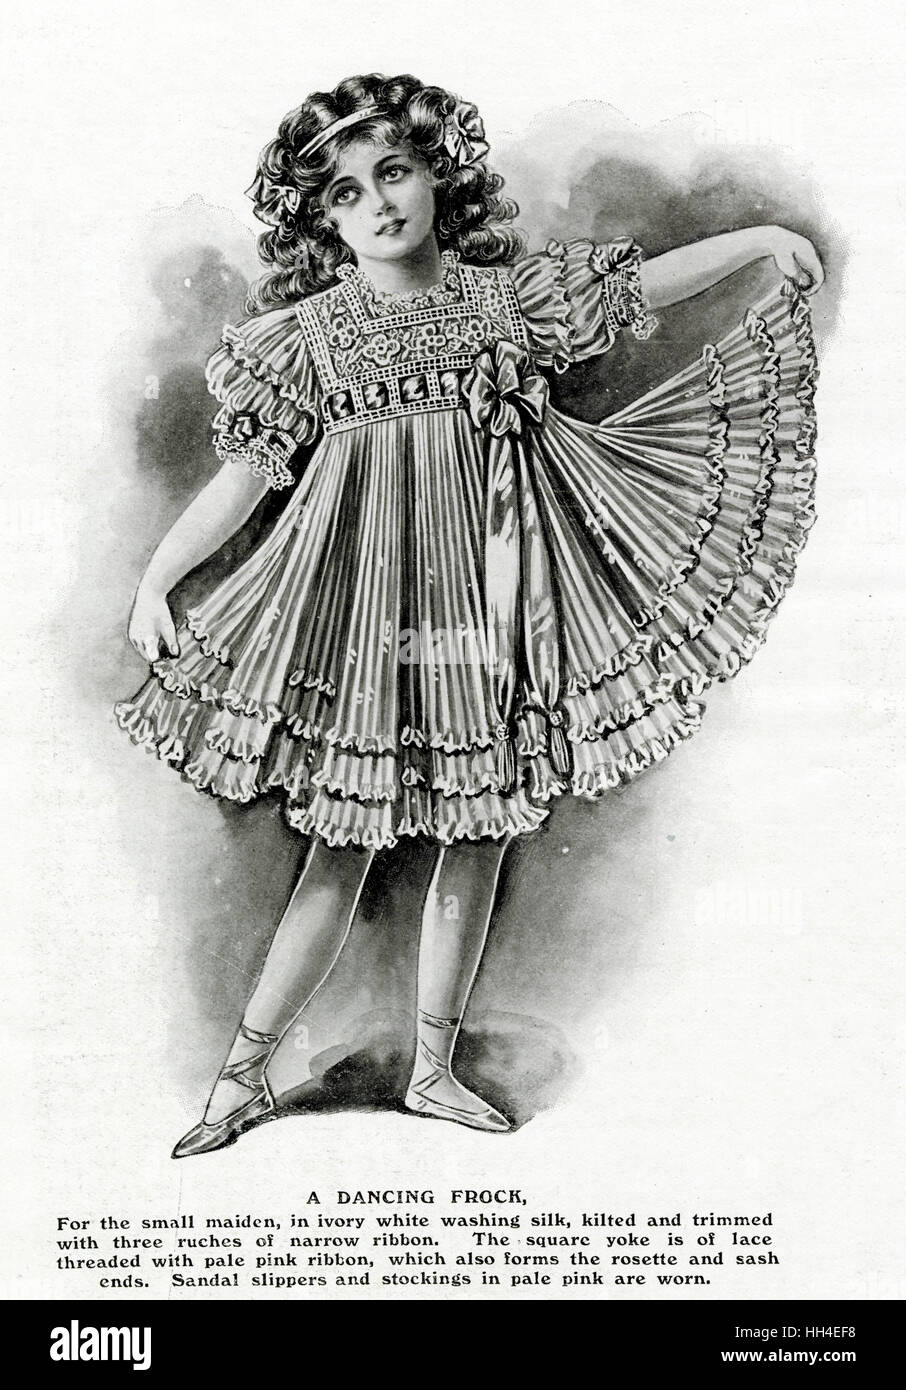 A dancing frock with square  lace yoke threaded with ribbon  tied to make a rosette with  sash ends, pleated skirt with  ruched ribbon trim, sandal  slippers with ribbon ties. Stock Photo